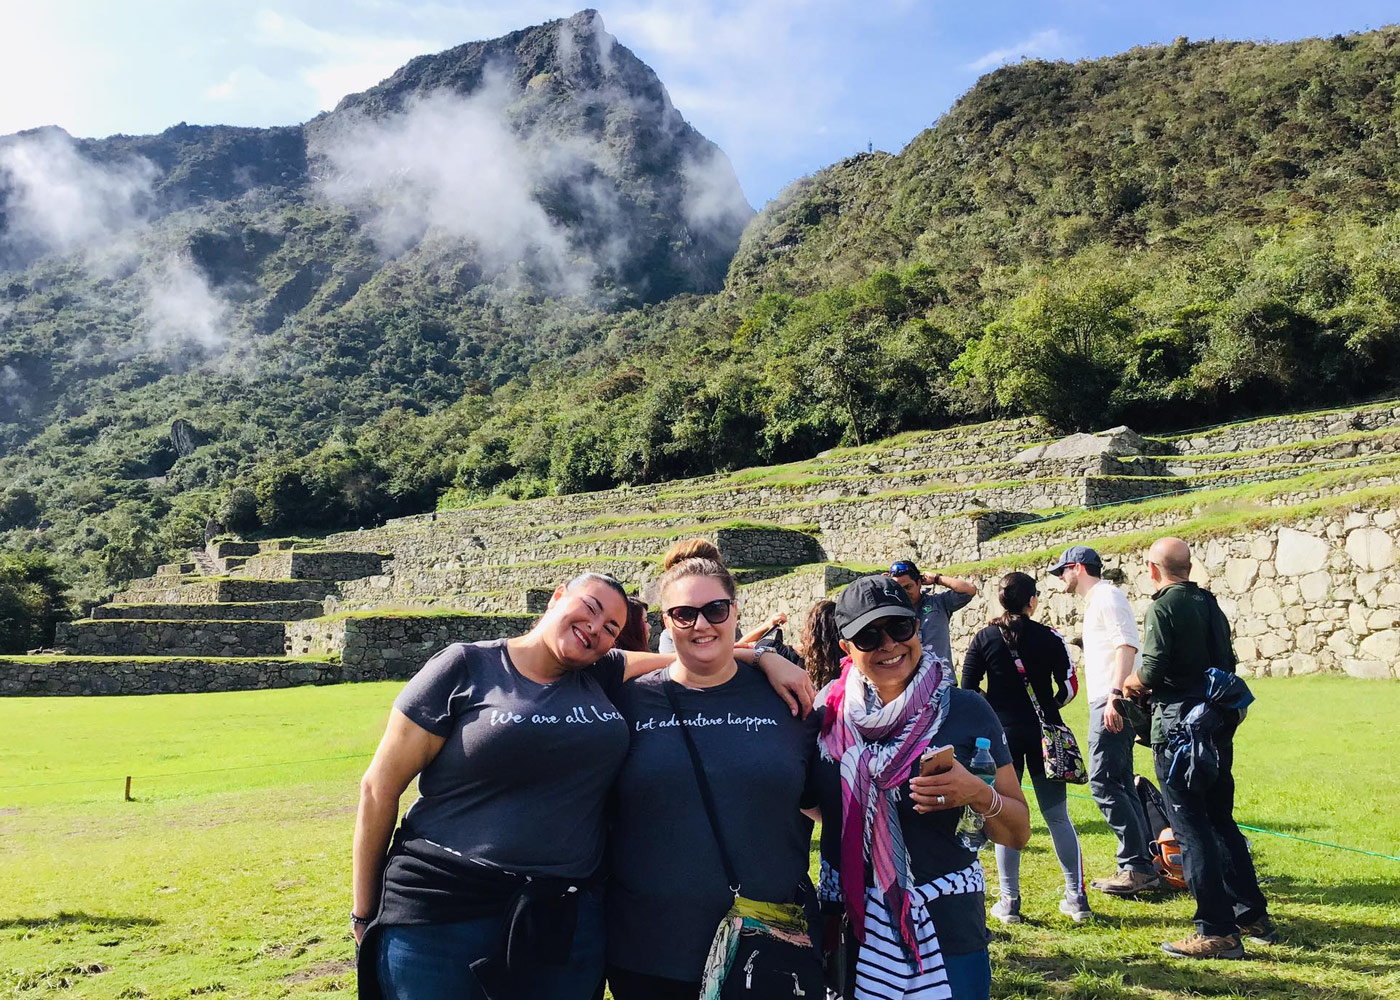 A group of 3 women at the base of Machu Picchu